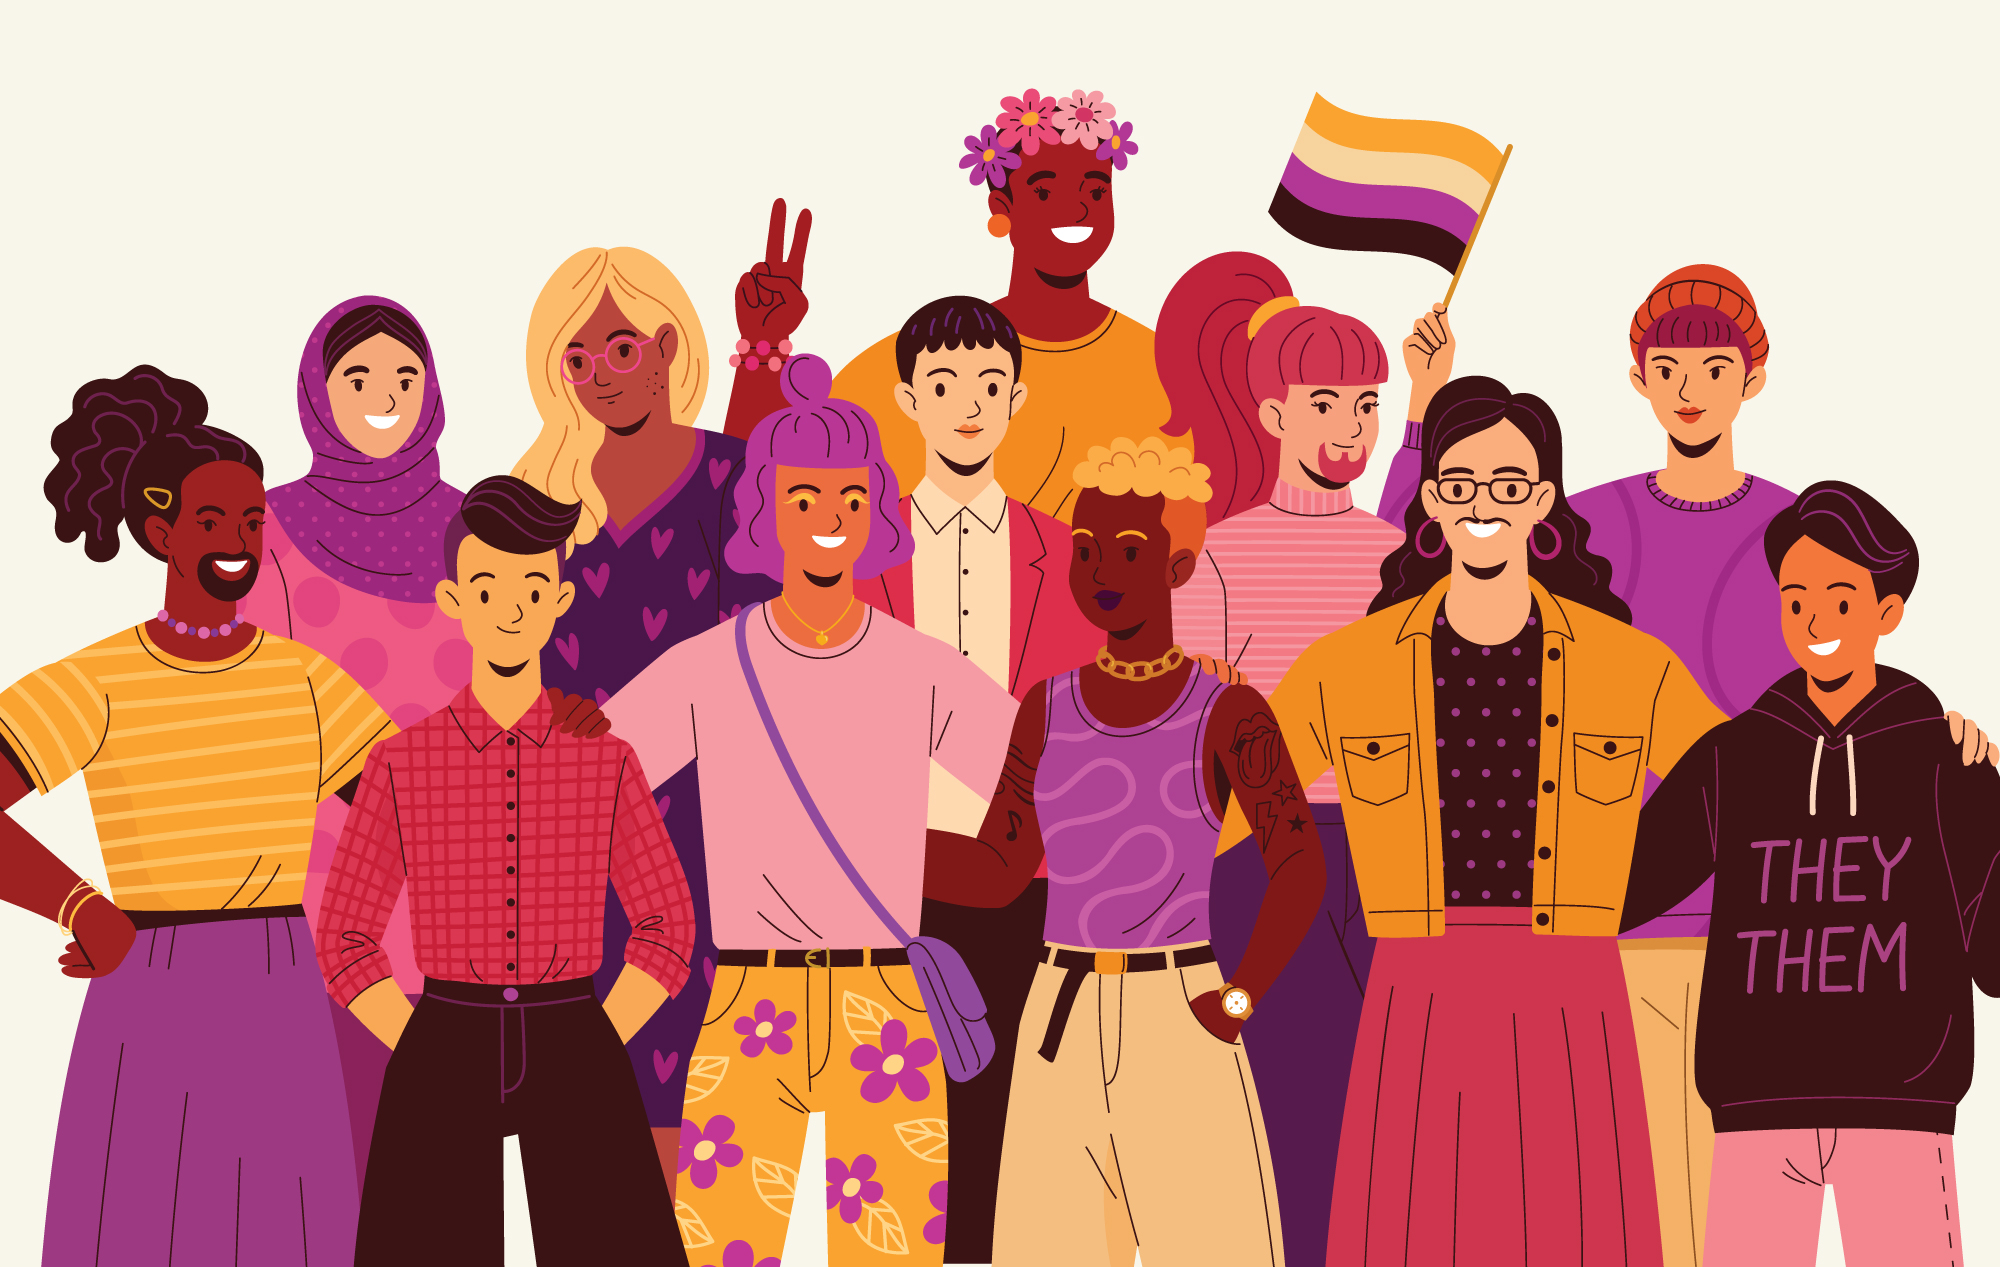 An illustration of a diverse group of young adults standing together.